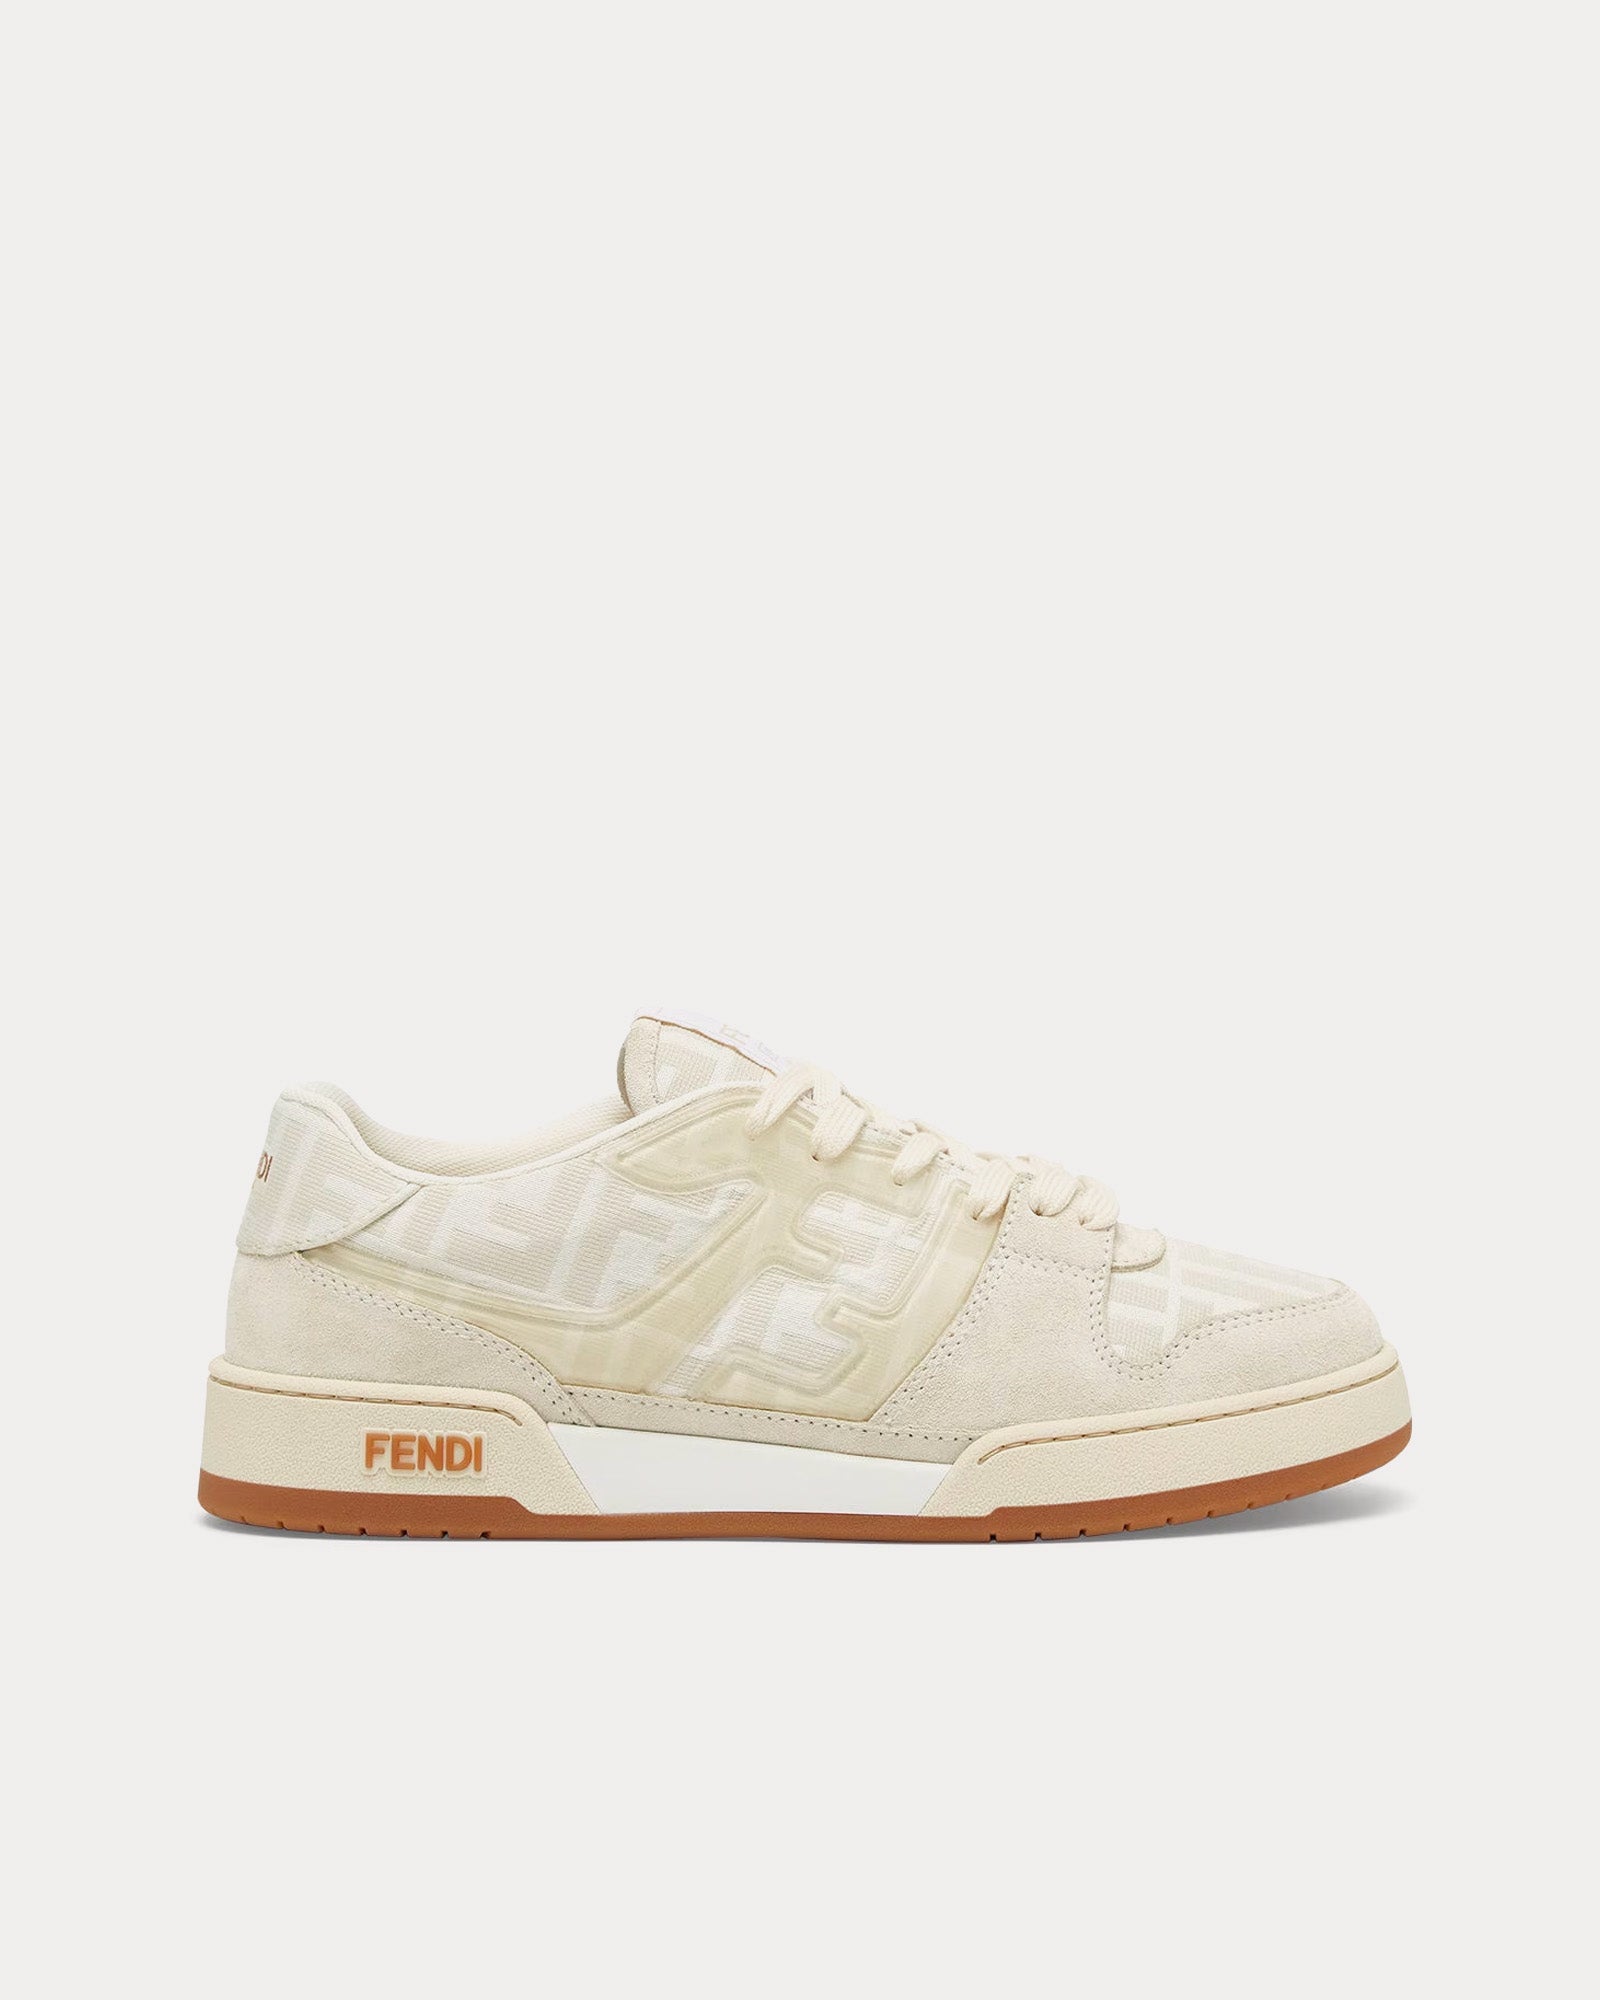 Fendi by Stefano Pilati - Match FF Fabric Canvas & Suede Dove Grey / White Low Top Sneakers